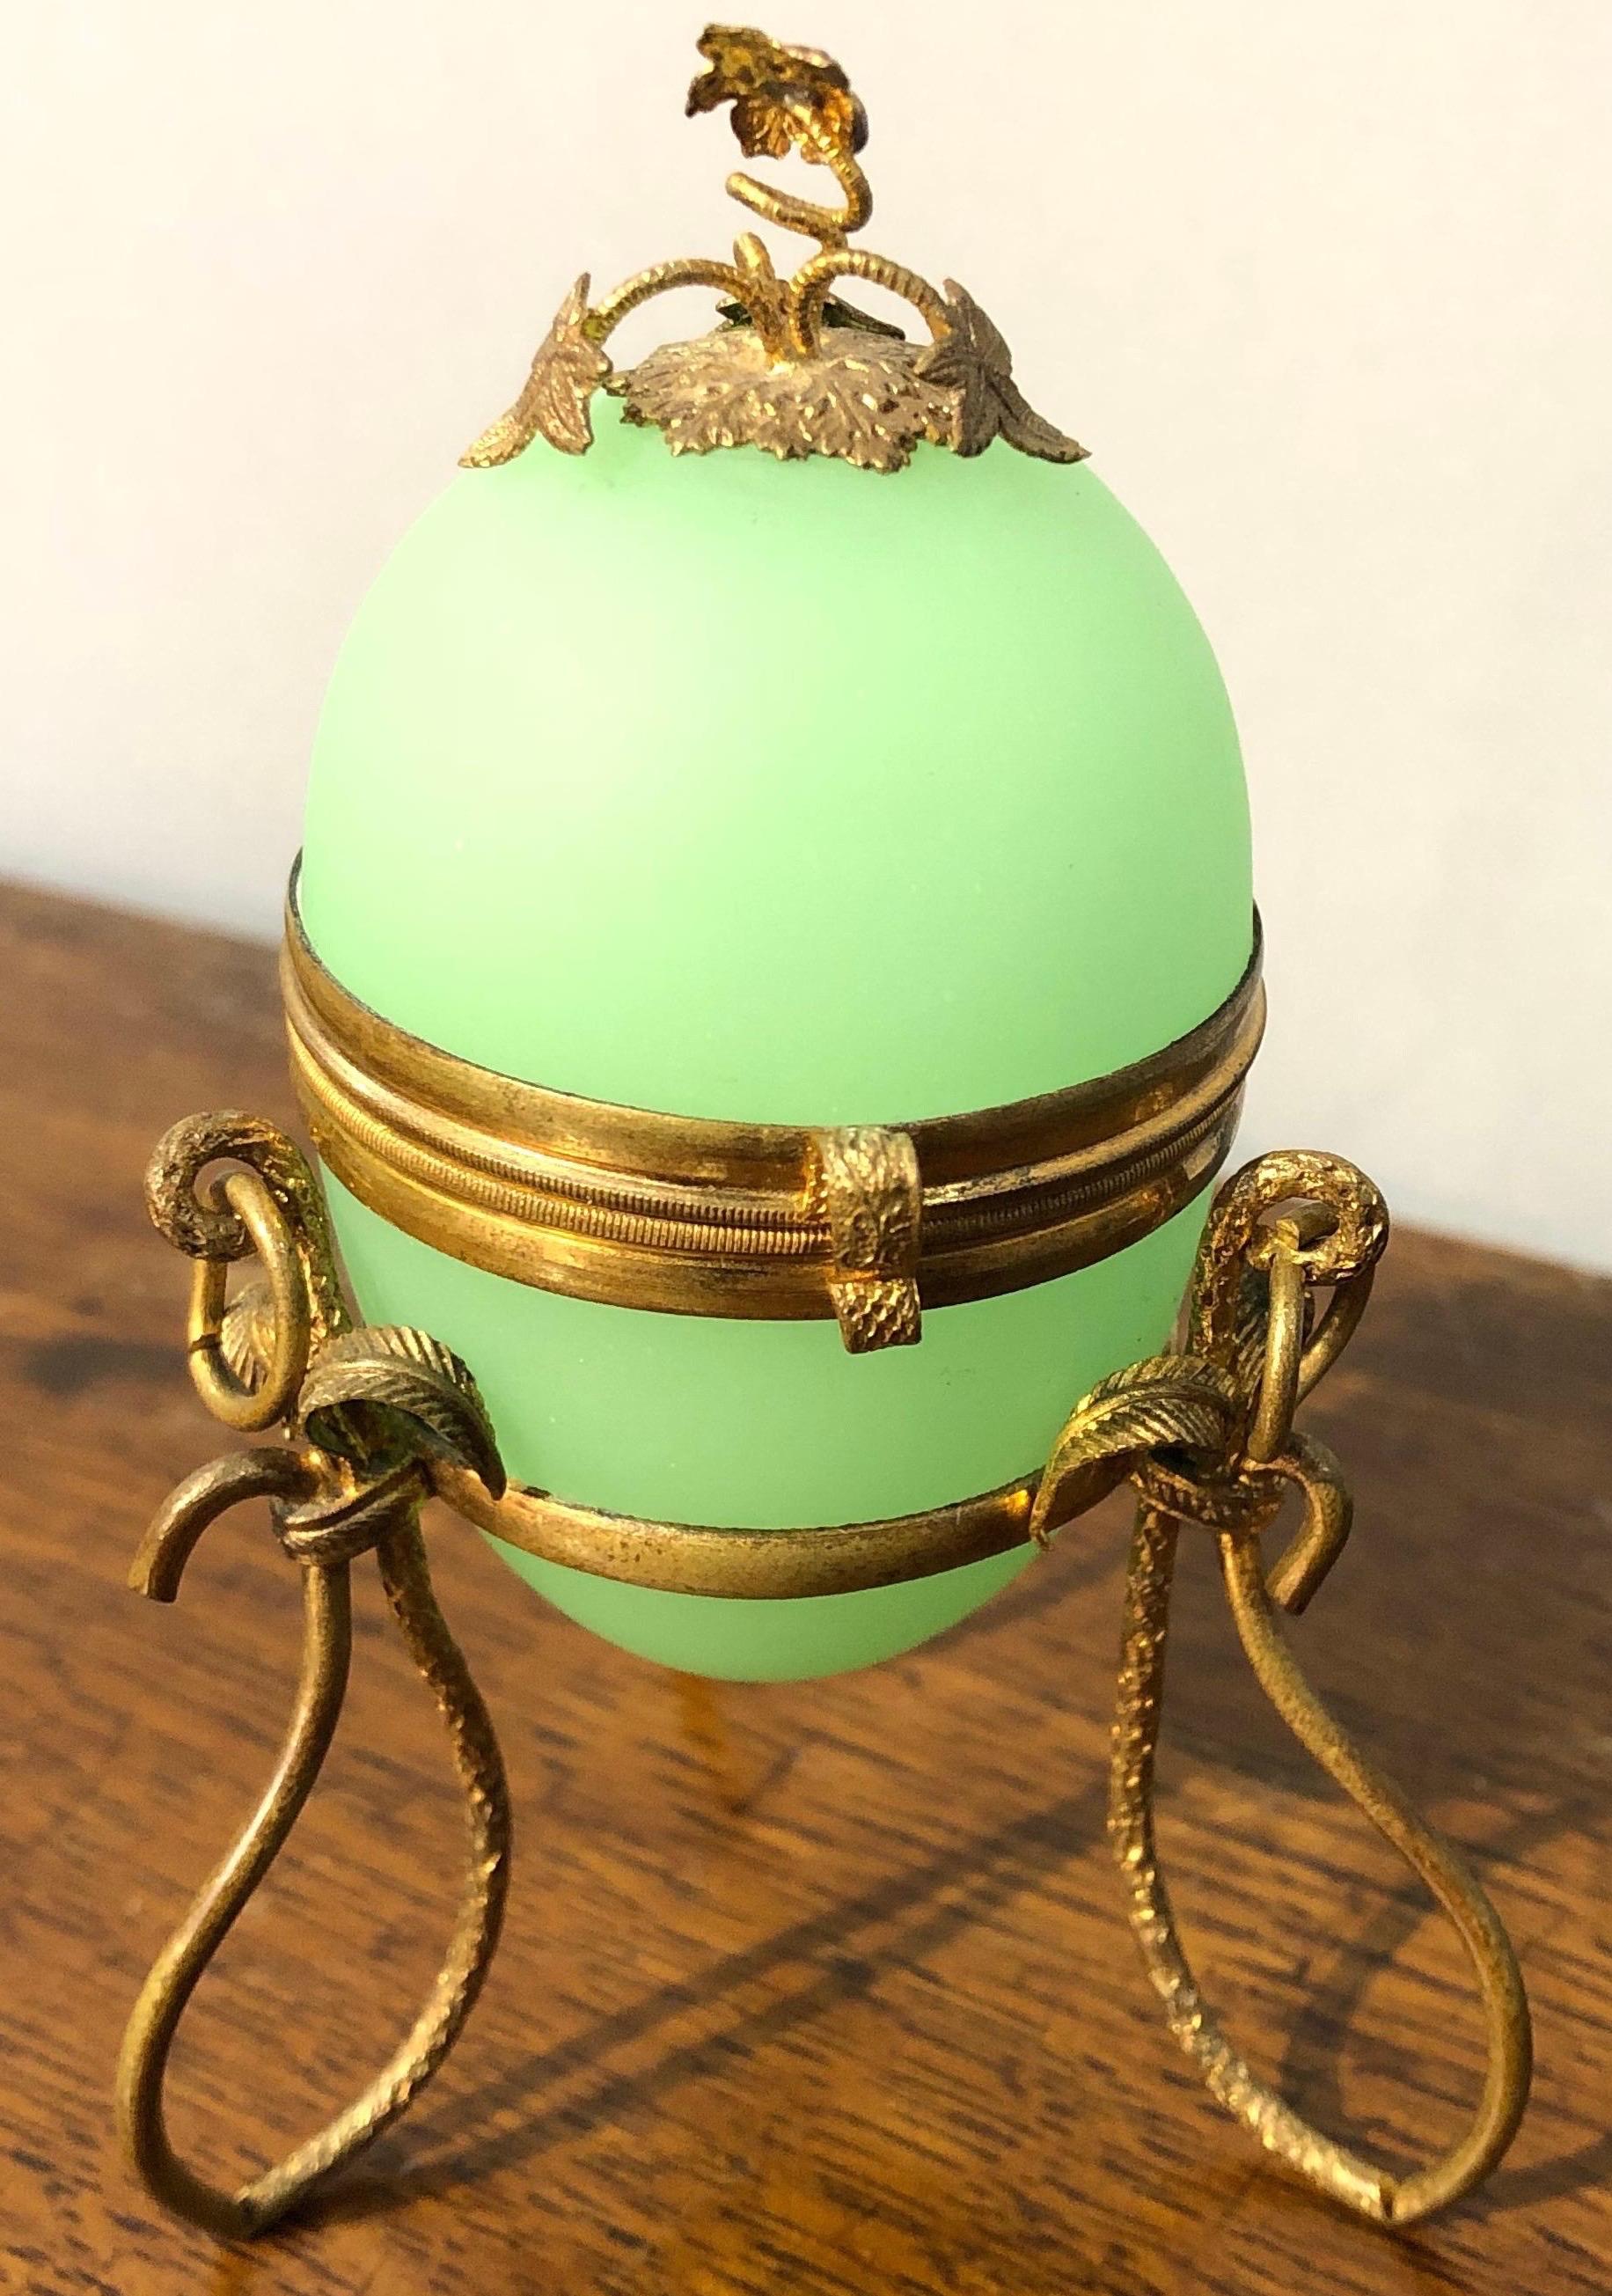 19th century French gilt bronze mounted green opaline egg shaped trinket box with hinged lid